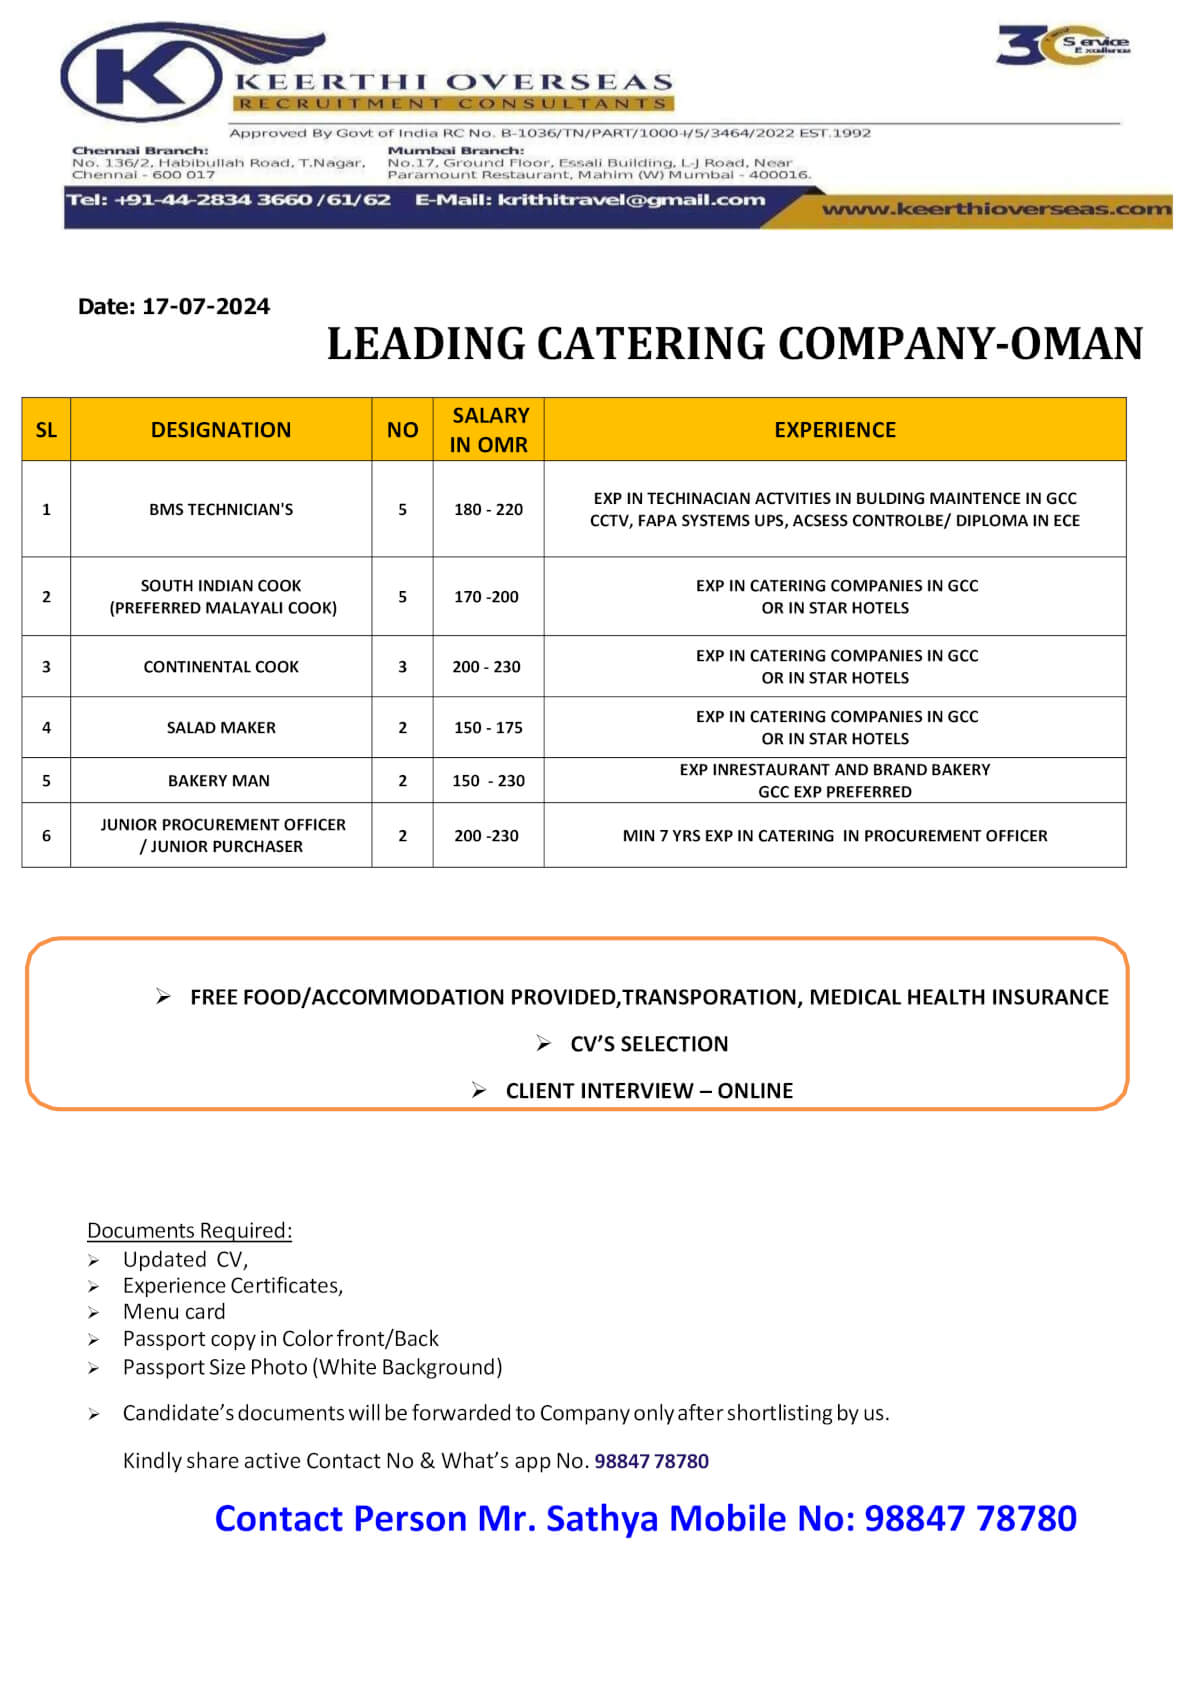 BMS TECHNICIAN'S /SOUTH INDIAN COOK (PREFERRED MALAYALI COOK) /CONTINENTAL COOK /SALAD MAKER /BAKERY MAN /JUNIOR PROCUREMENT OFFICER / JUNIOR PURCHASER